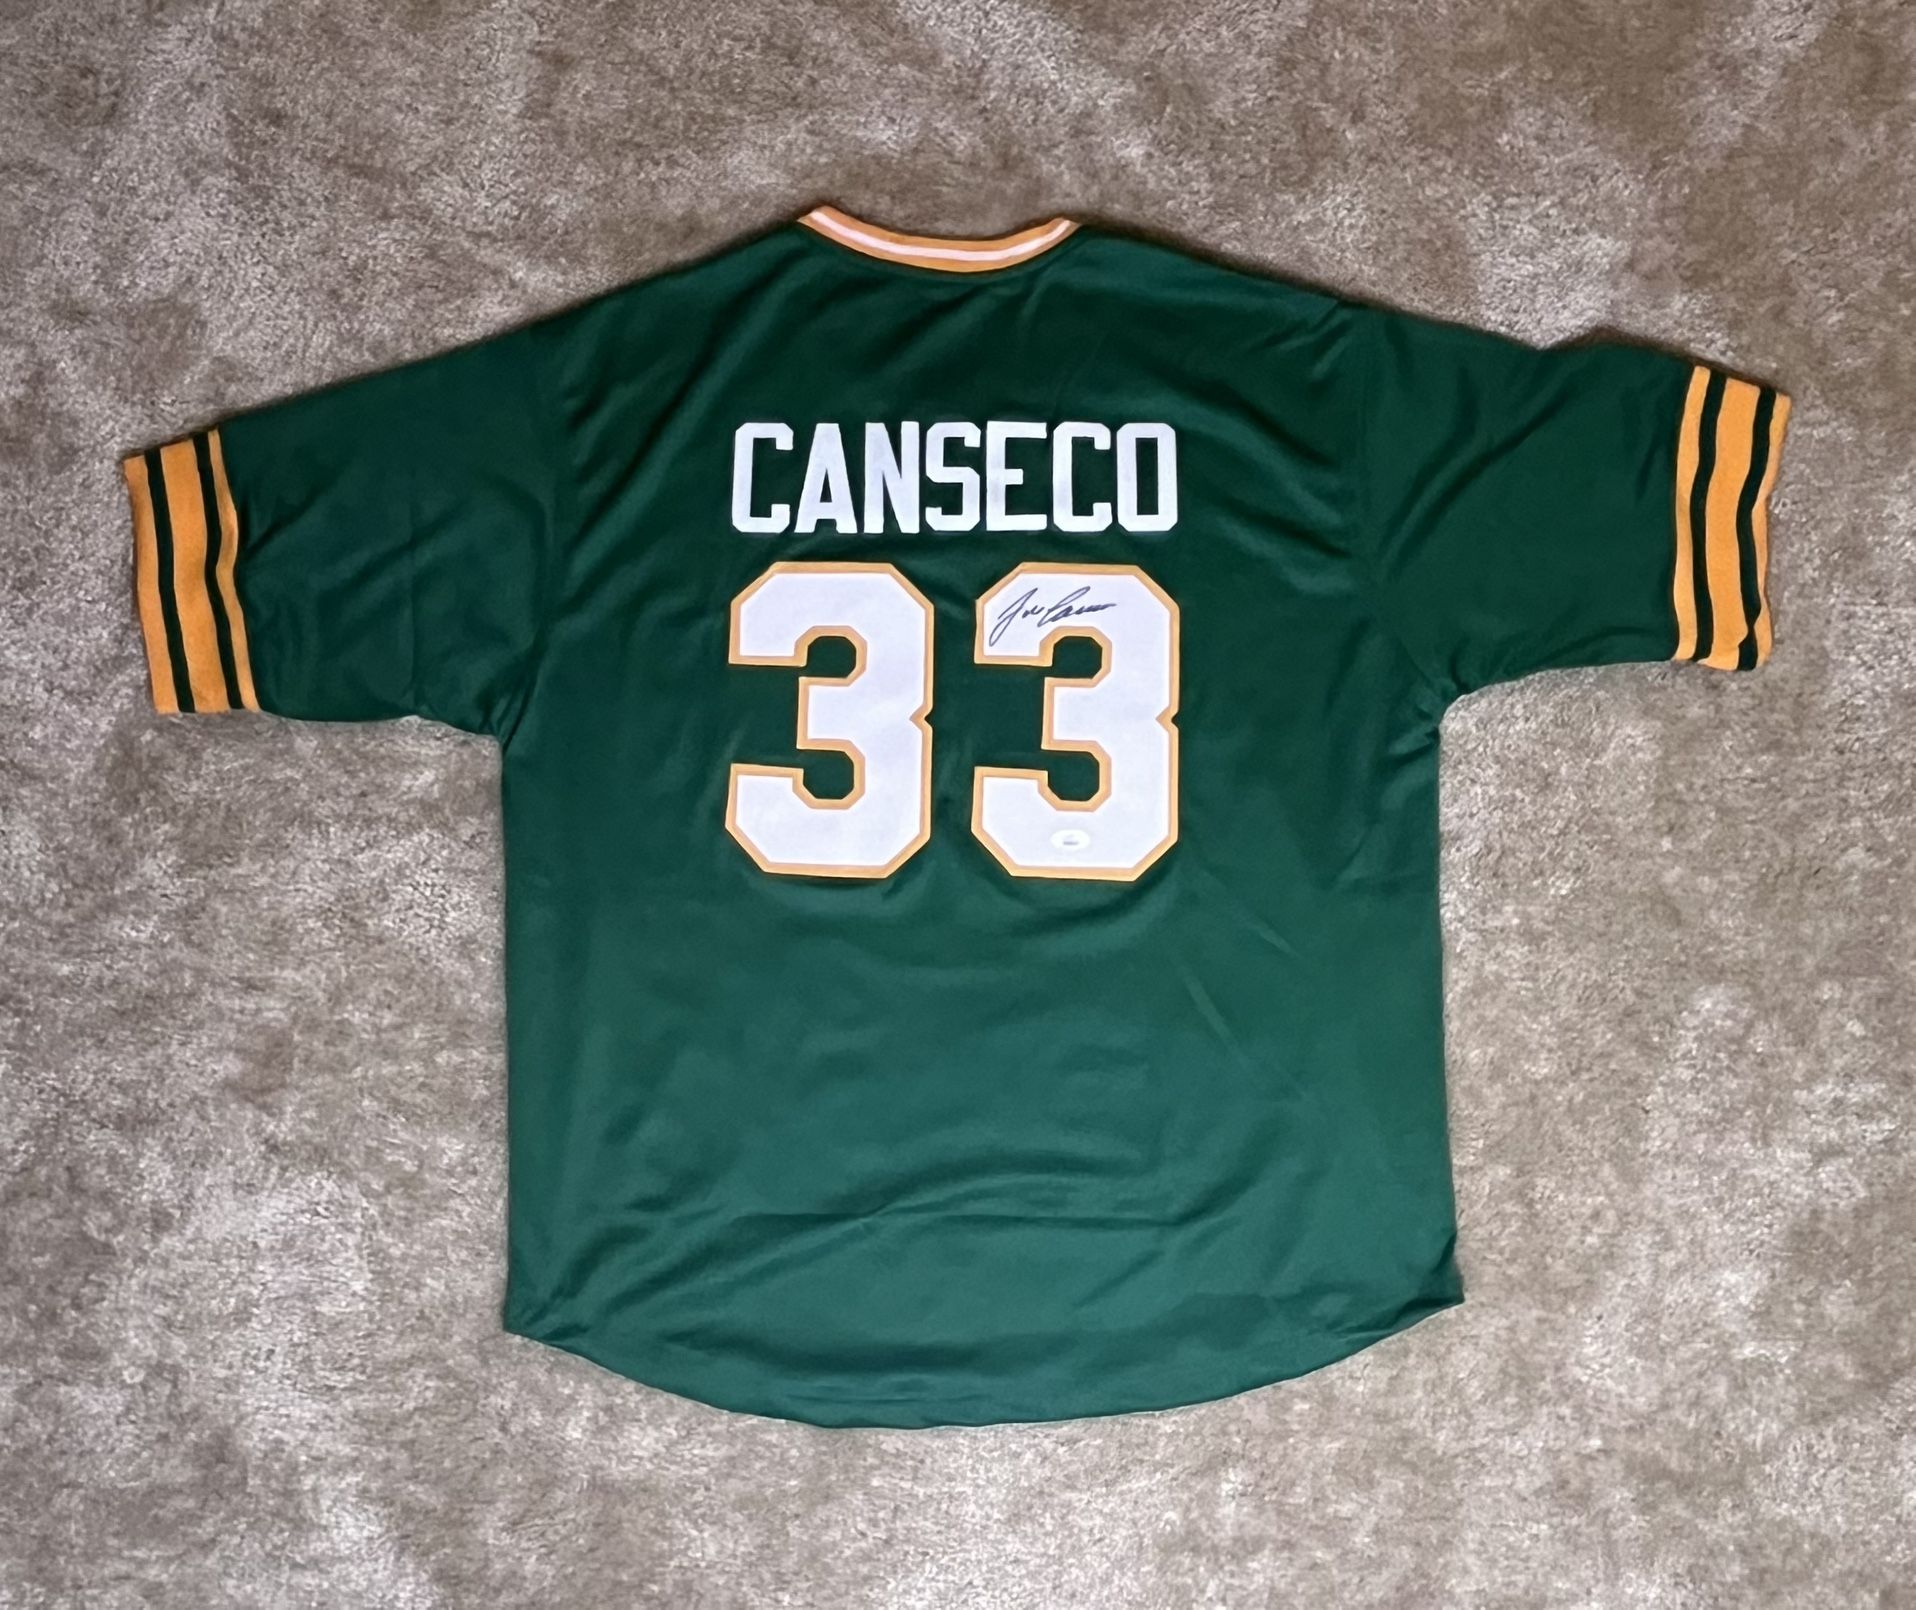 JOSE CANSECO SIGNED AUTO OAKLAND ATHLETICS GREEN JUICED JERSEY JSA  AUTOGRAPHED. for Sale in Yuba City, CA - OfferUp